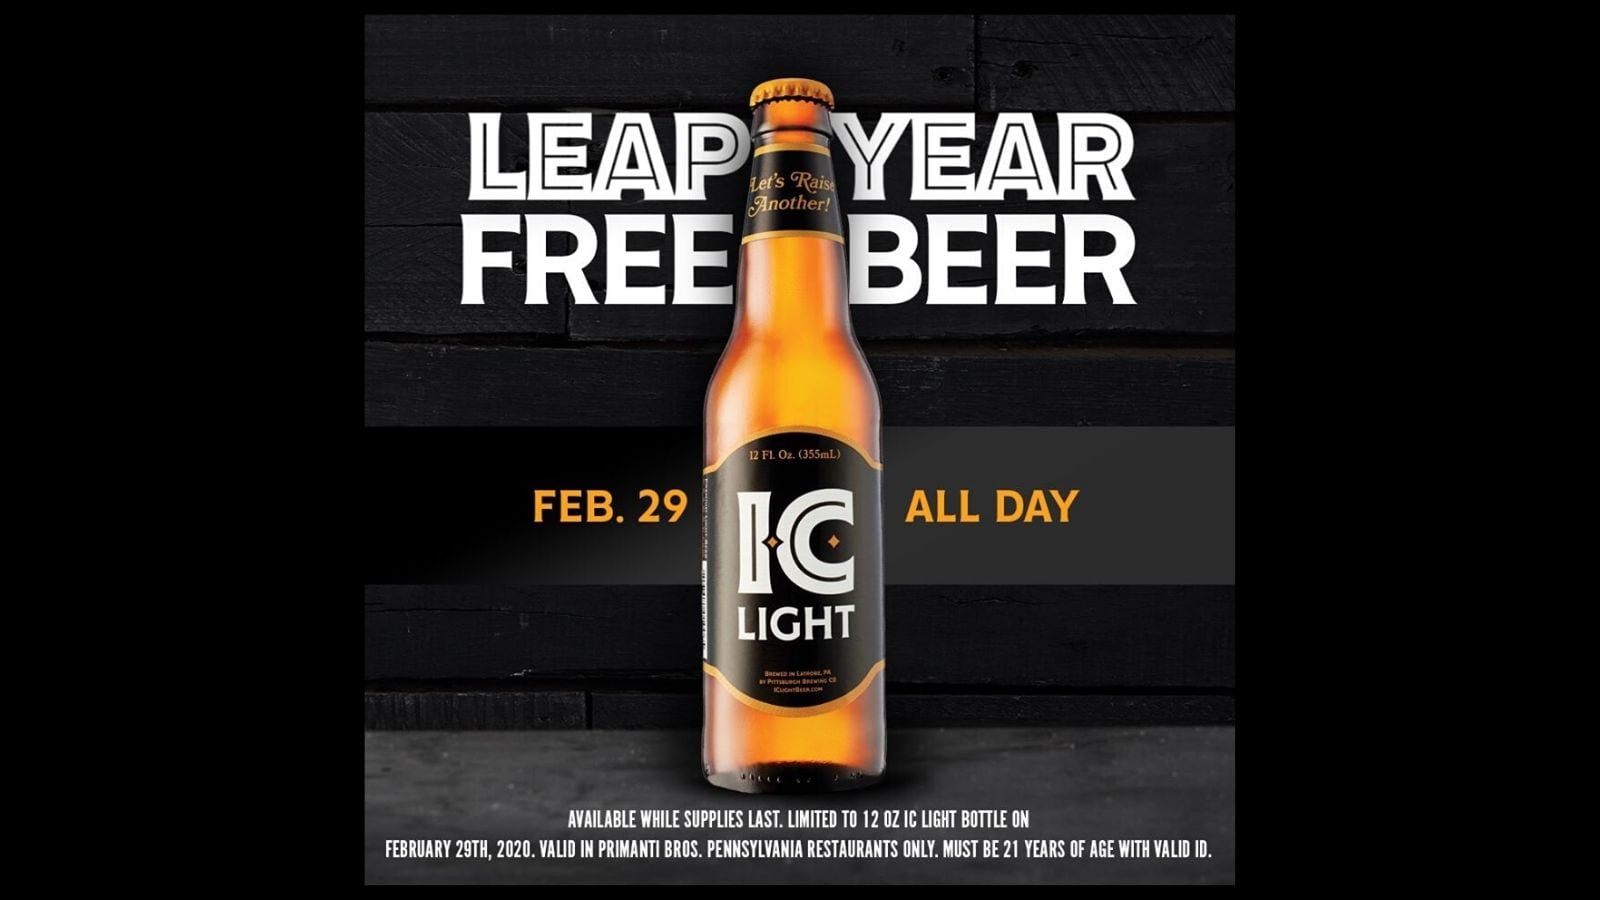 leap-year-free-beer-16-9